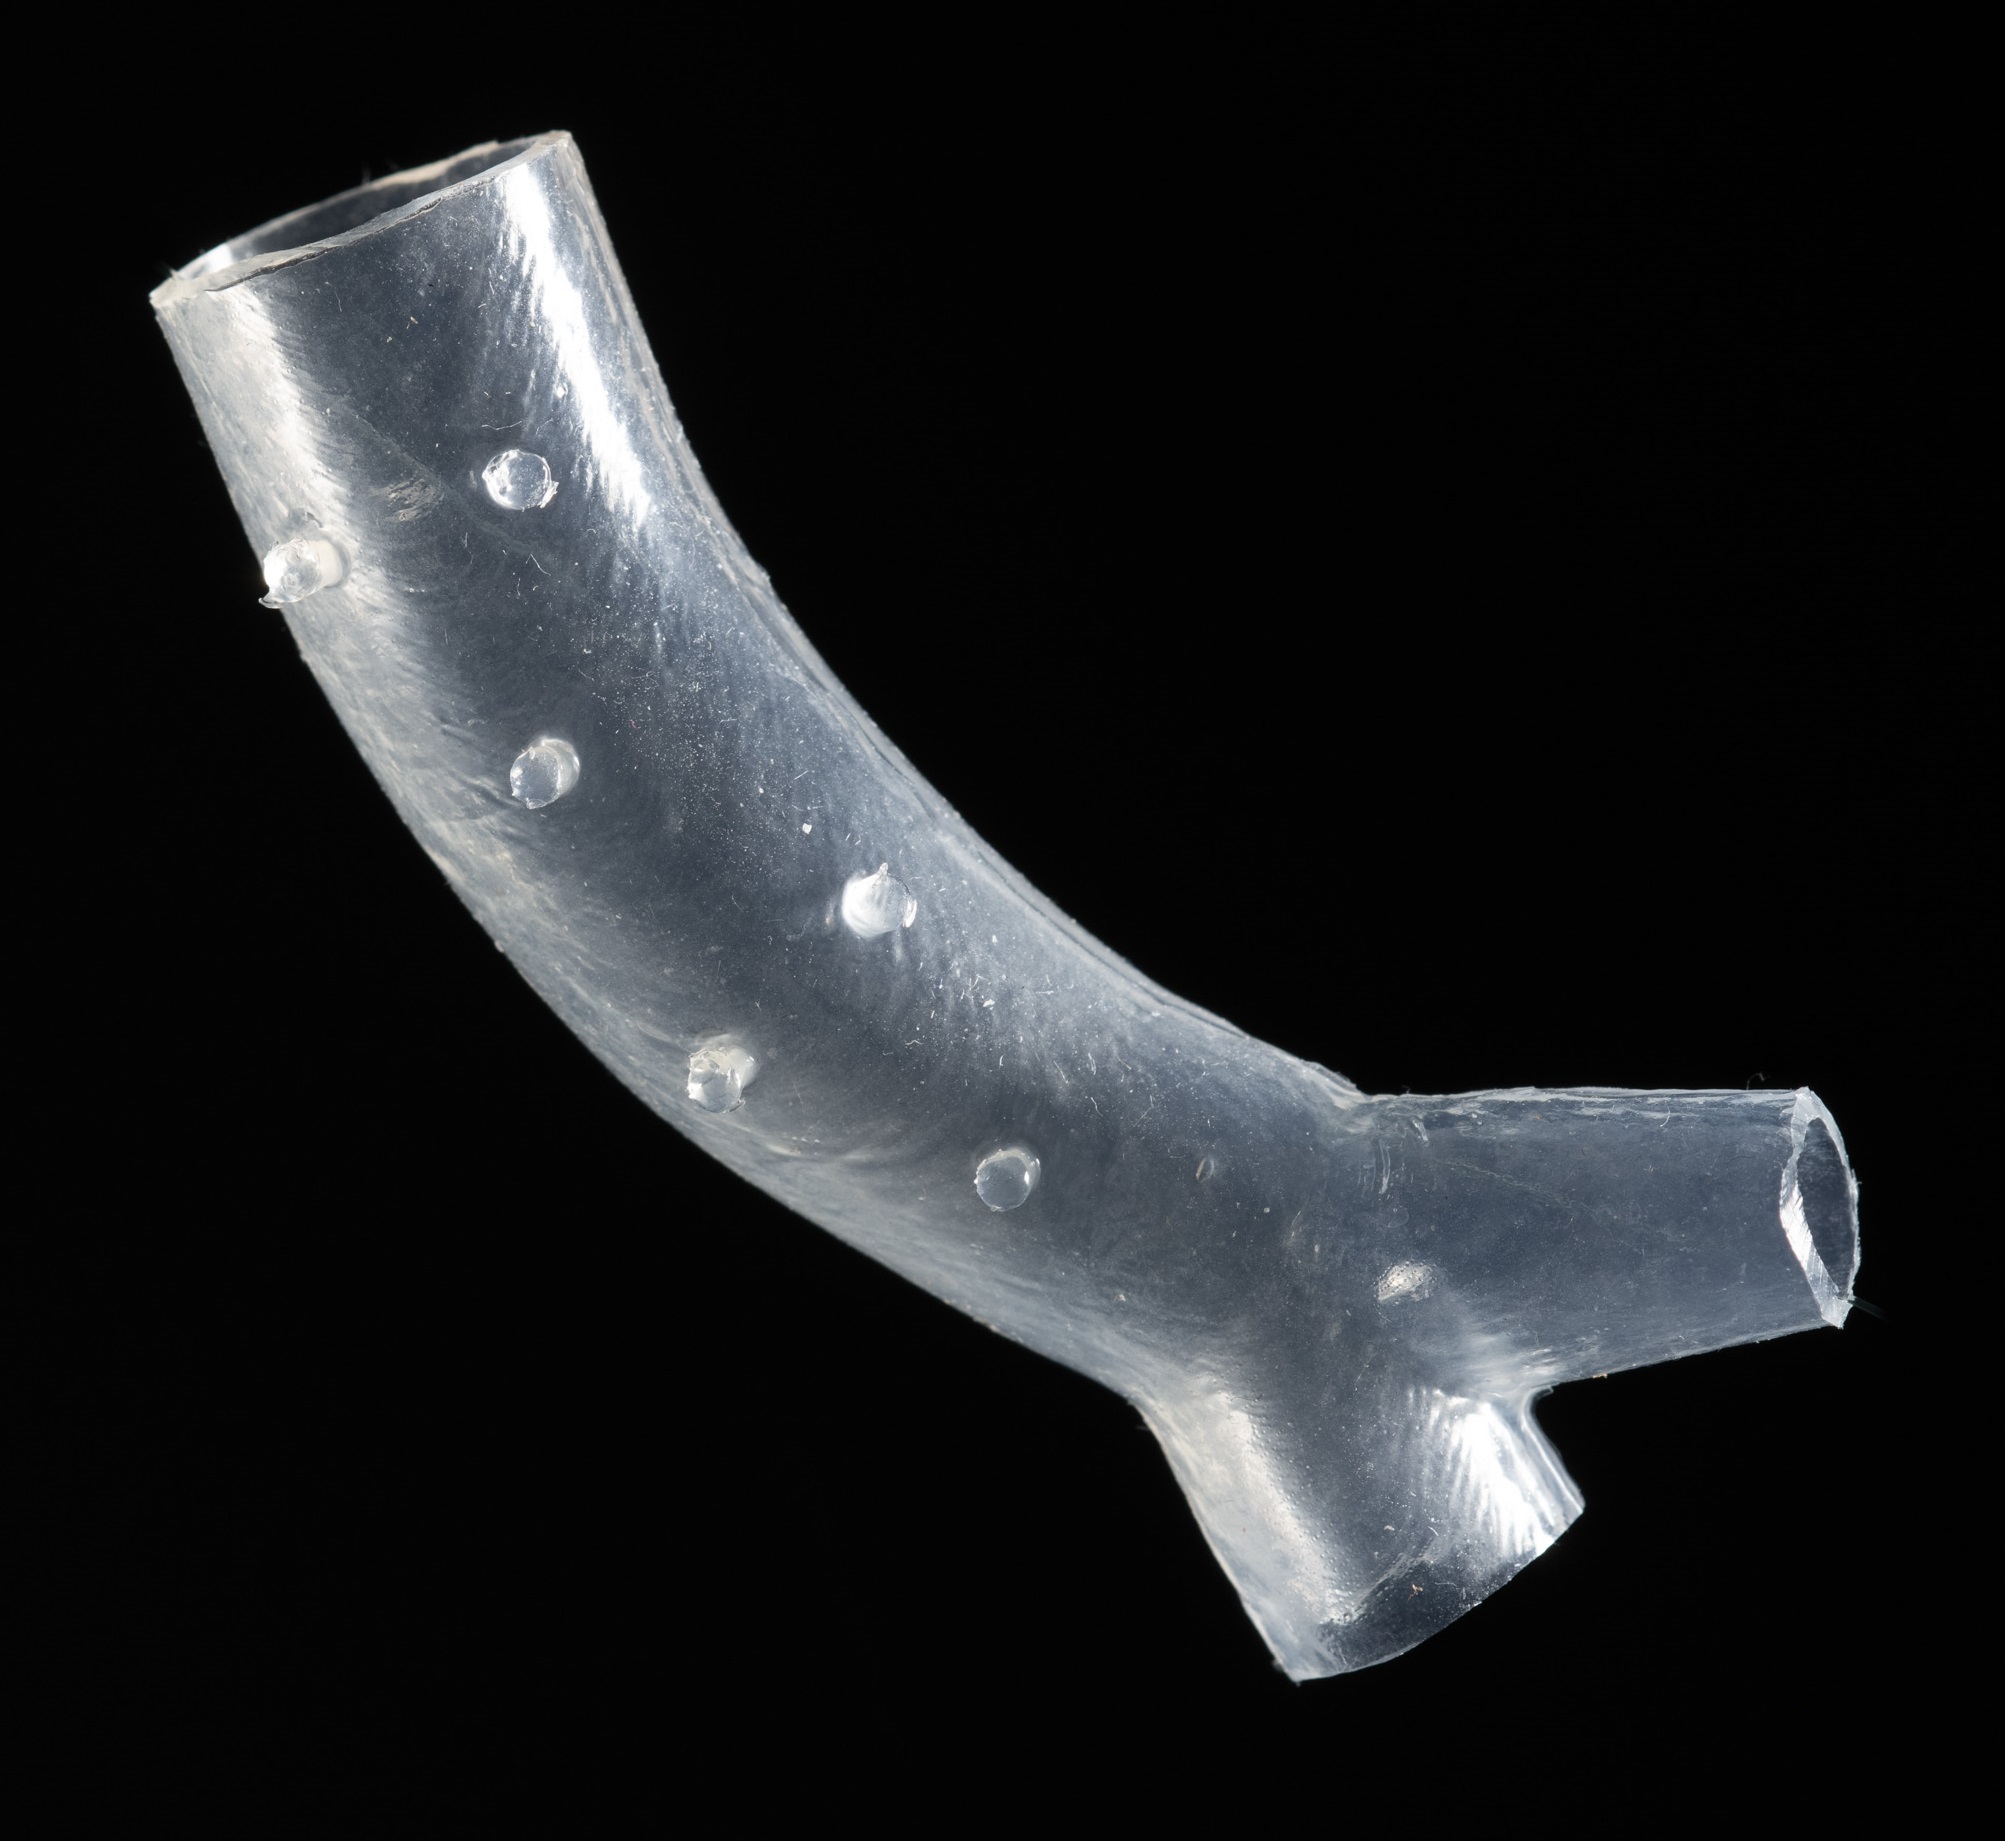 3D printed stent. Photo via Cleveland Clinic.